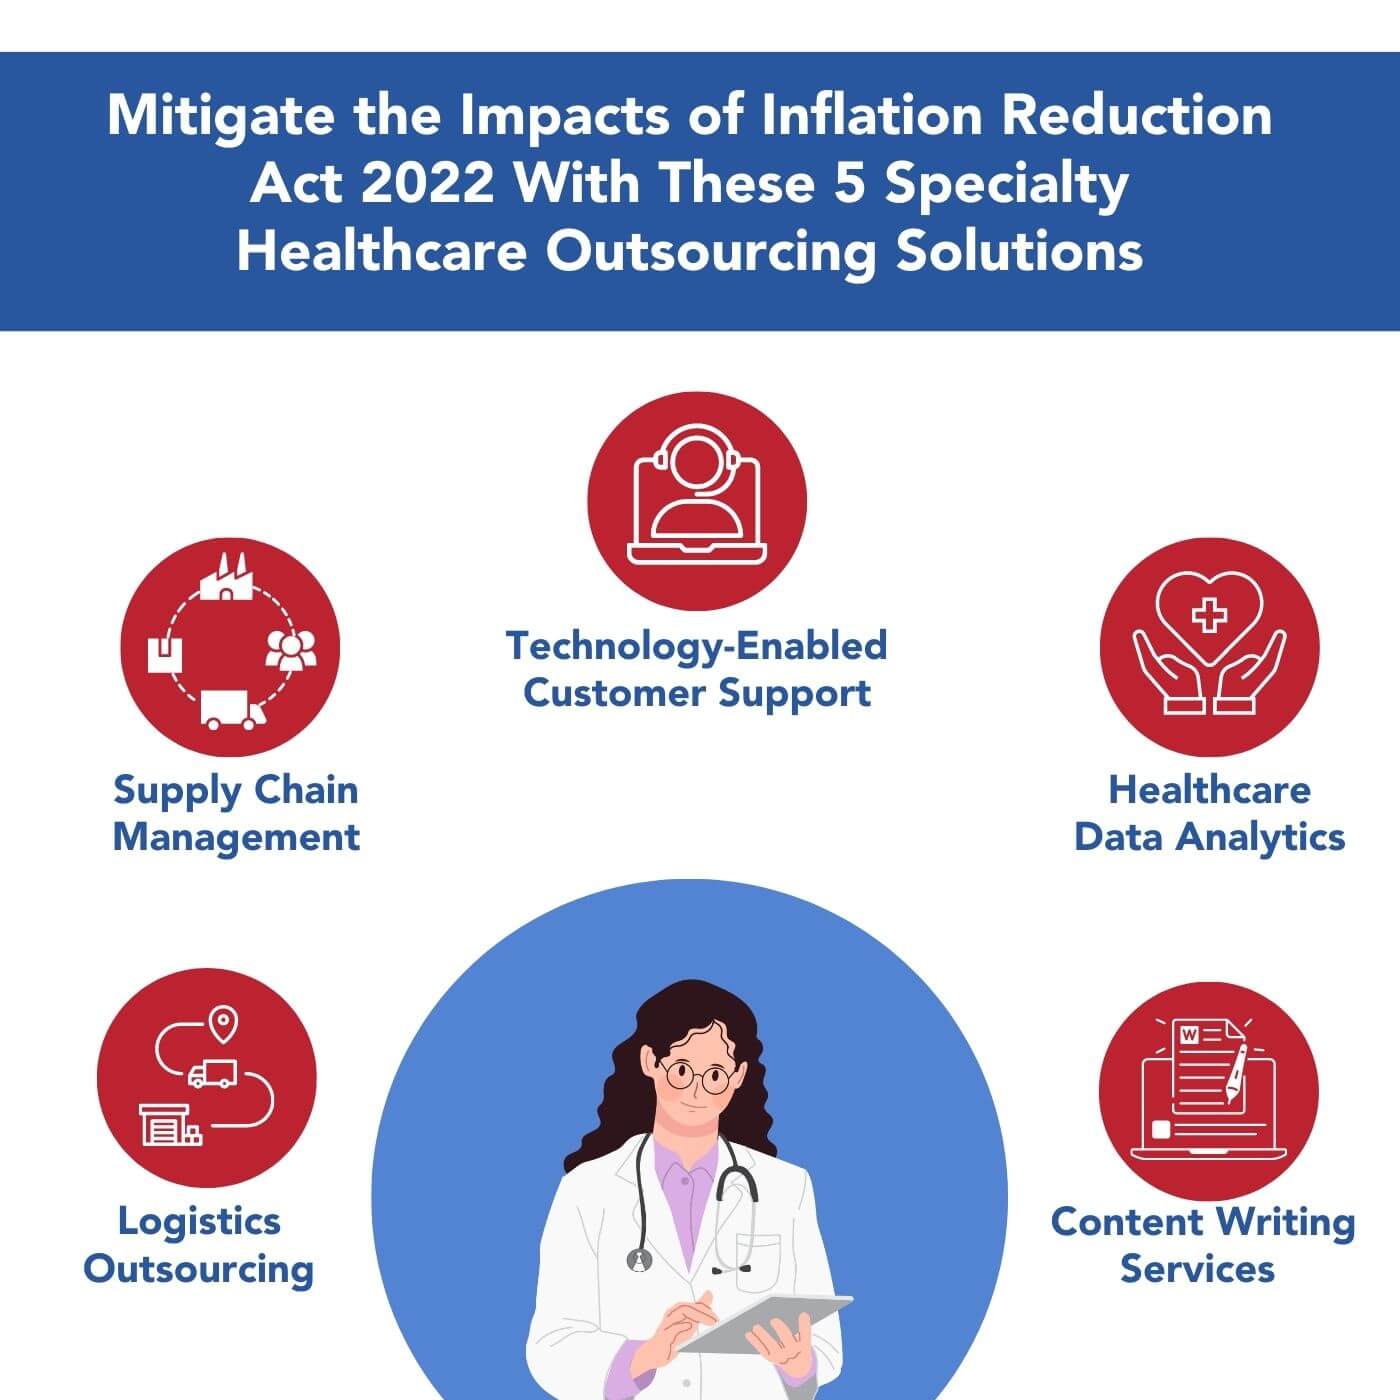 5 Specialty Healthcare Outsourcing Services that Mitigate the Impacts of Inflation Reduction Act 2022